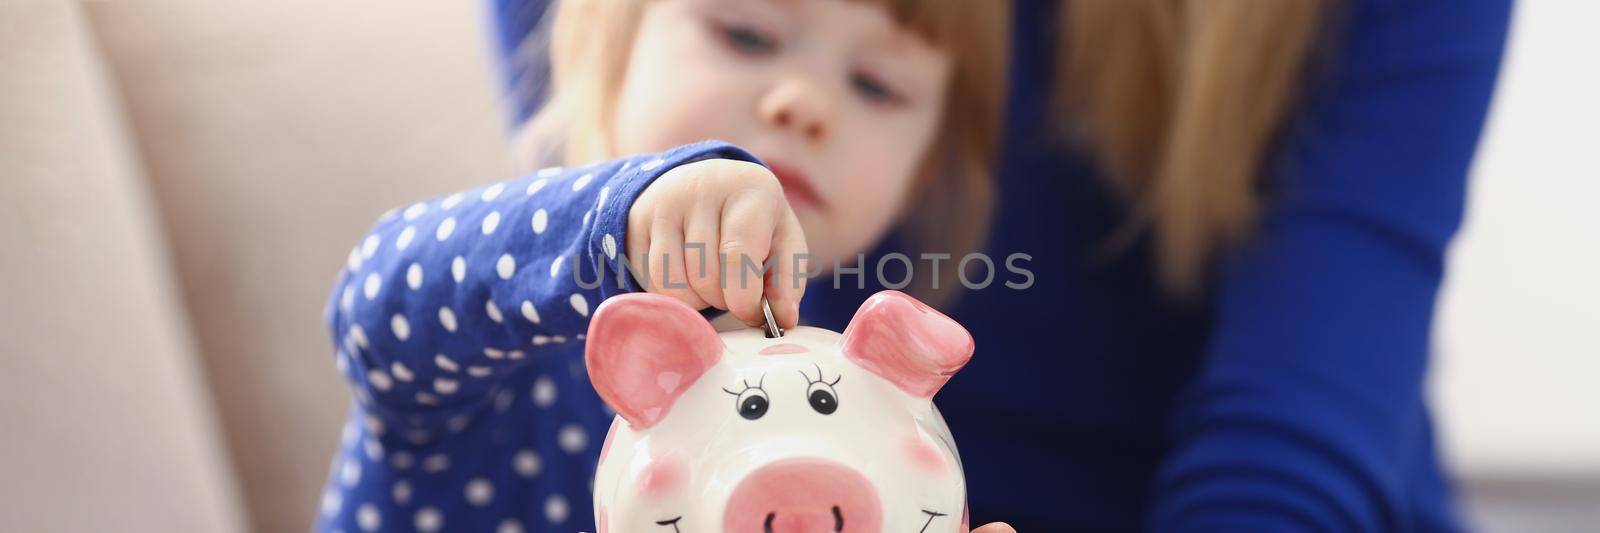 A little girl puts a coin in a pink piggy bank by kuprevich